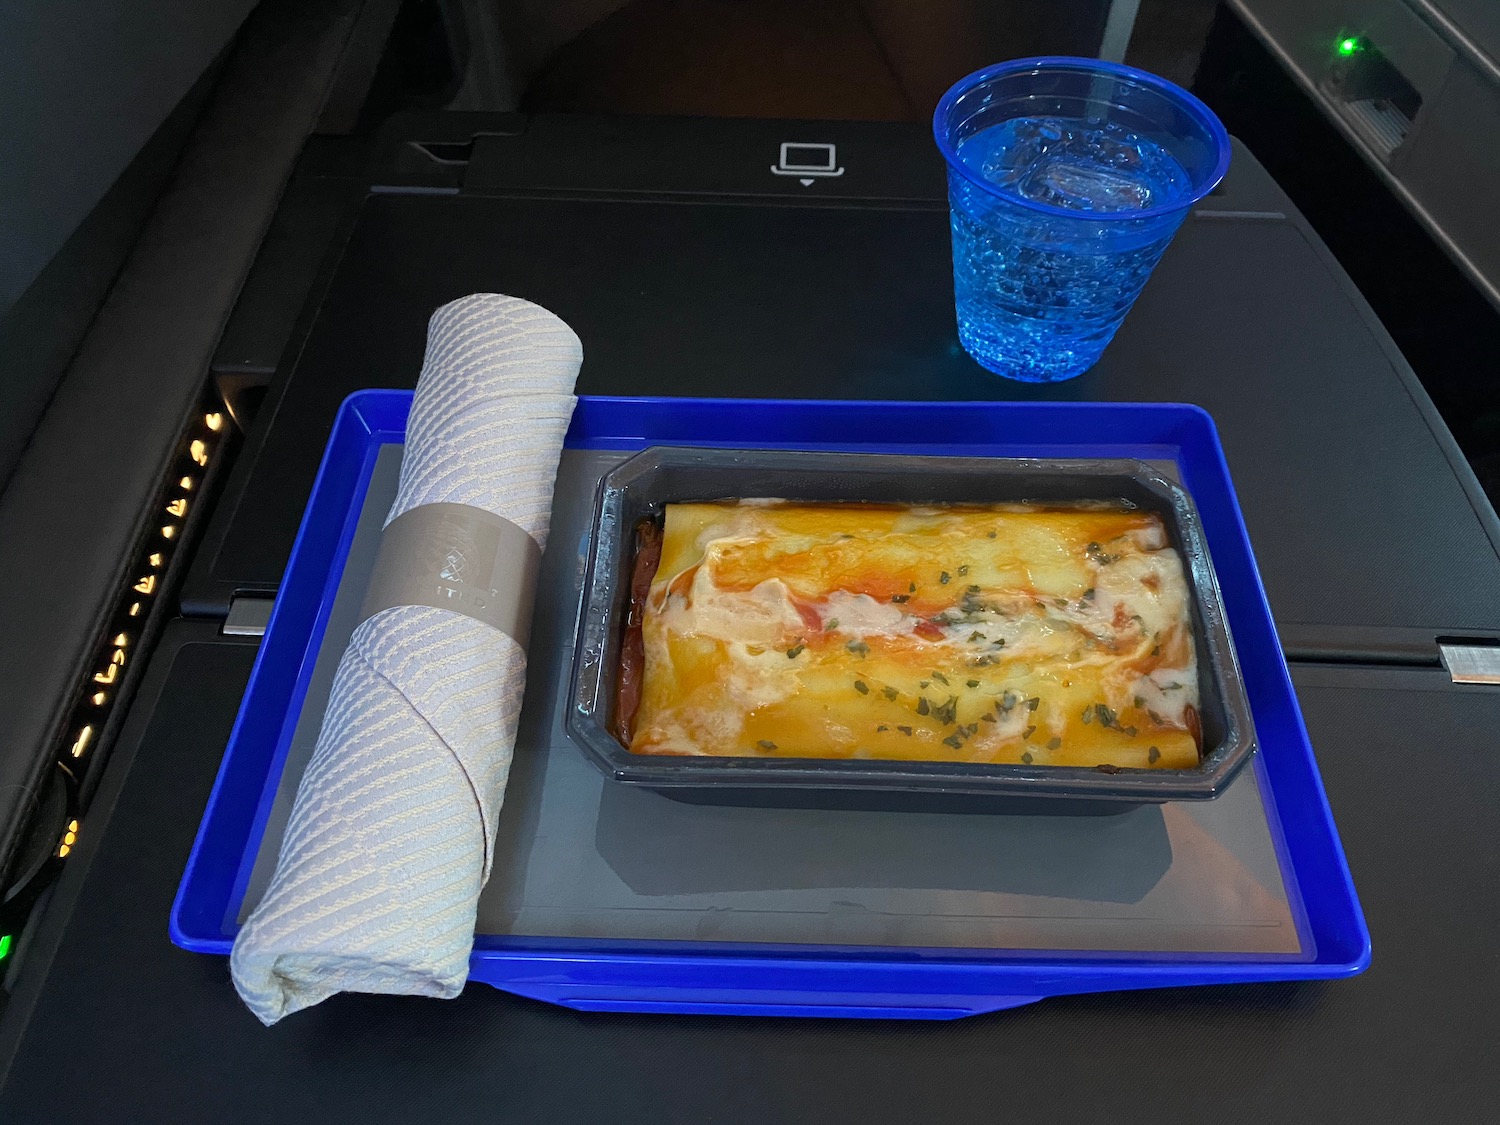 a tray of food and a napkin on a tray